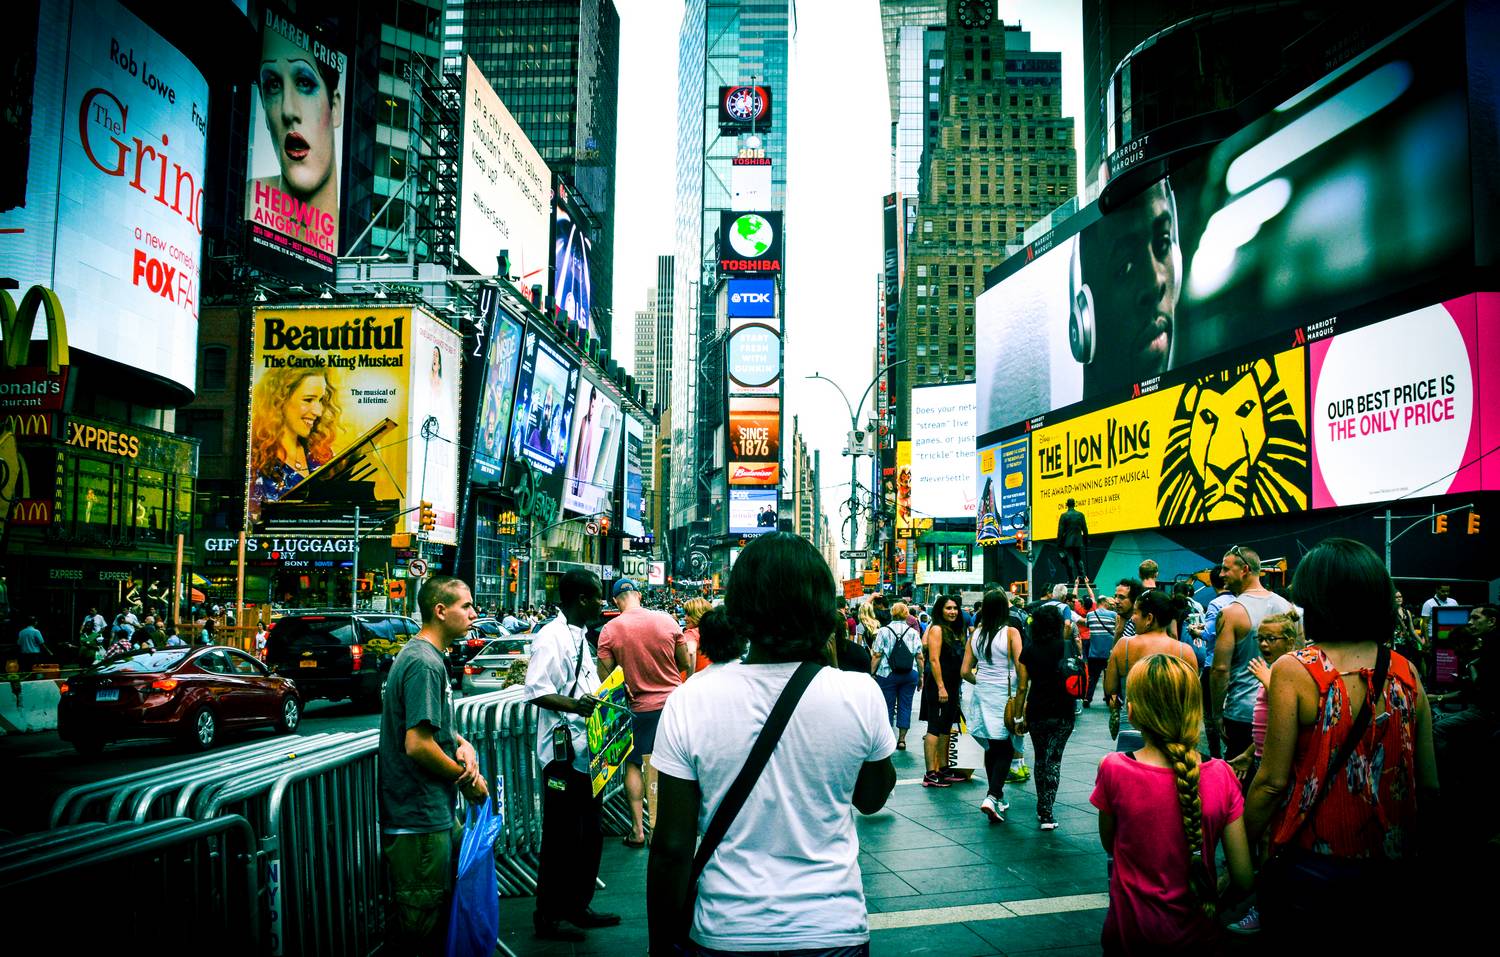 Nath in Times Square - New York, United States